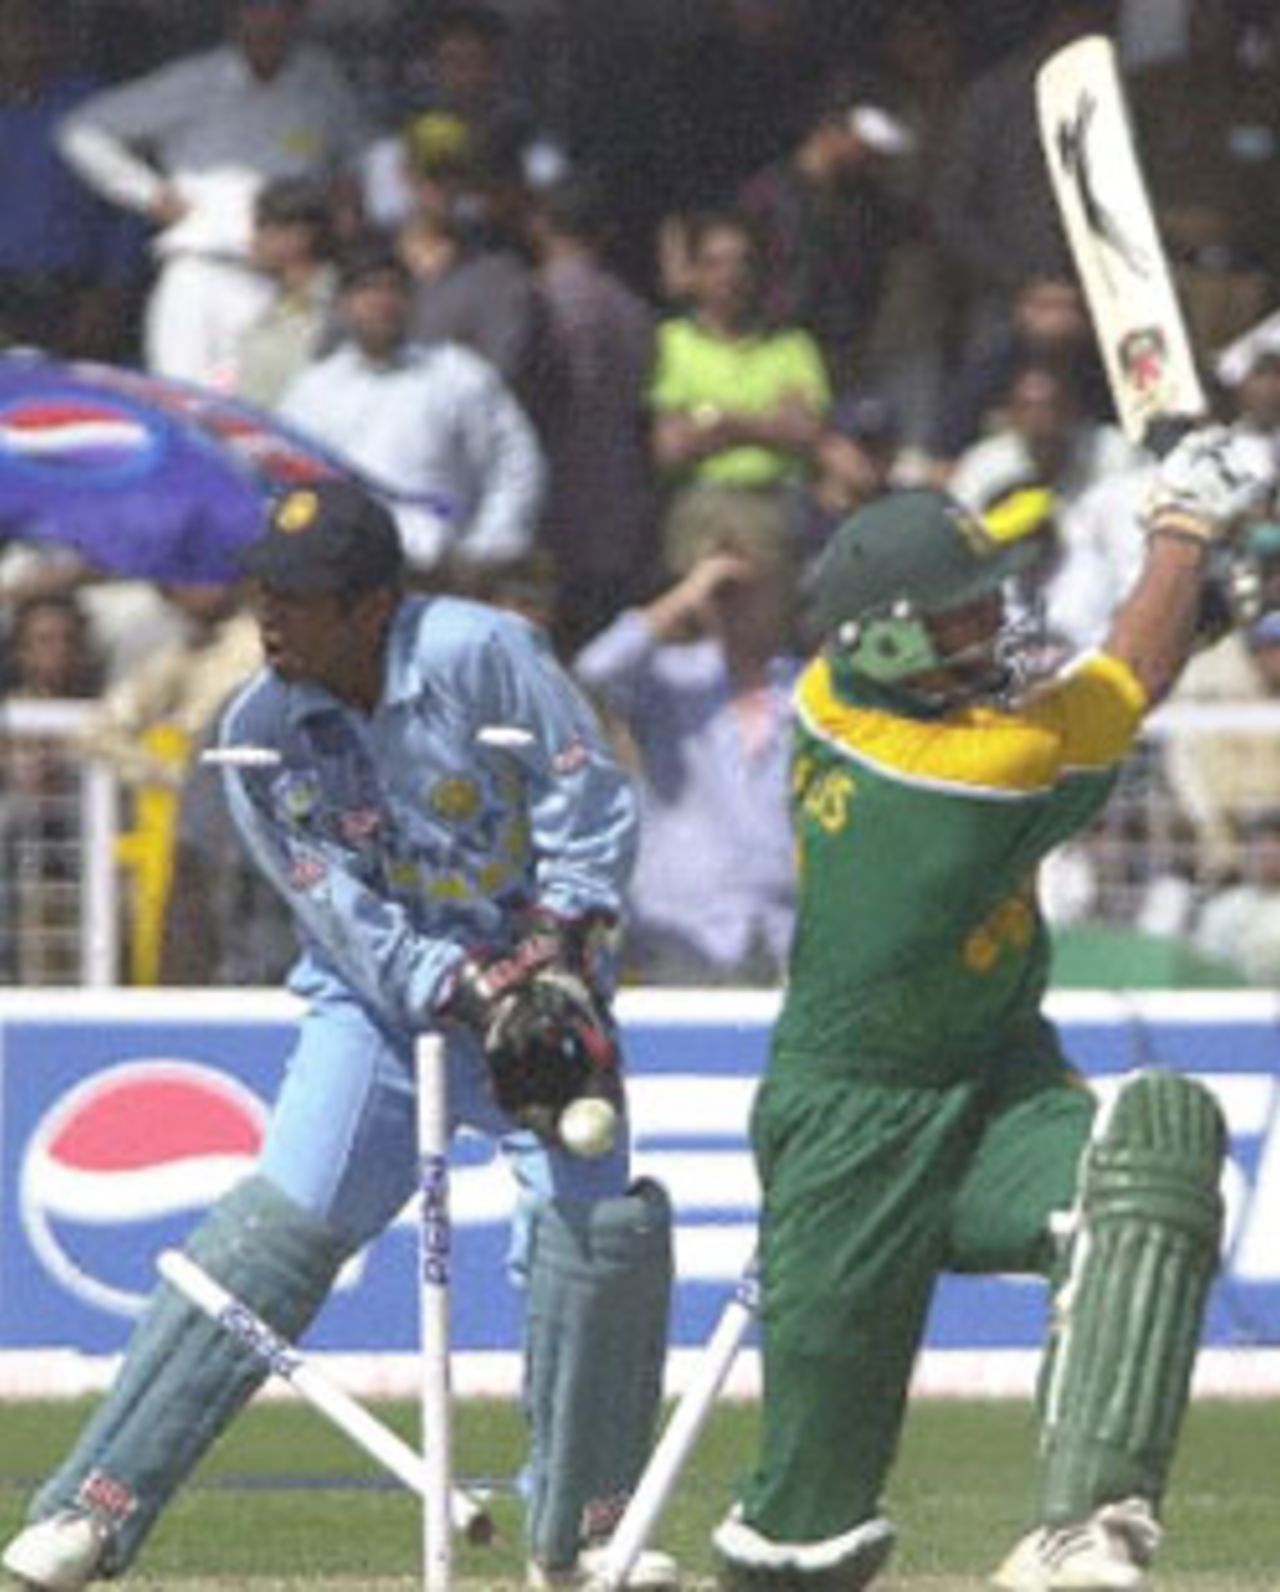 Indian wicket keeper Sameer Dighe stumps South African batsman Jacques Kallis on a delivery from Sunil Joshi during the third one-day international cricket match between South Africa and India played at Faridabad, 15 March 2000. South Africa went to beat India by two wickets as the five match series stands at 2-1 in favour of India